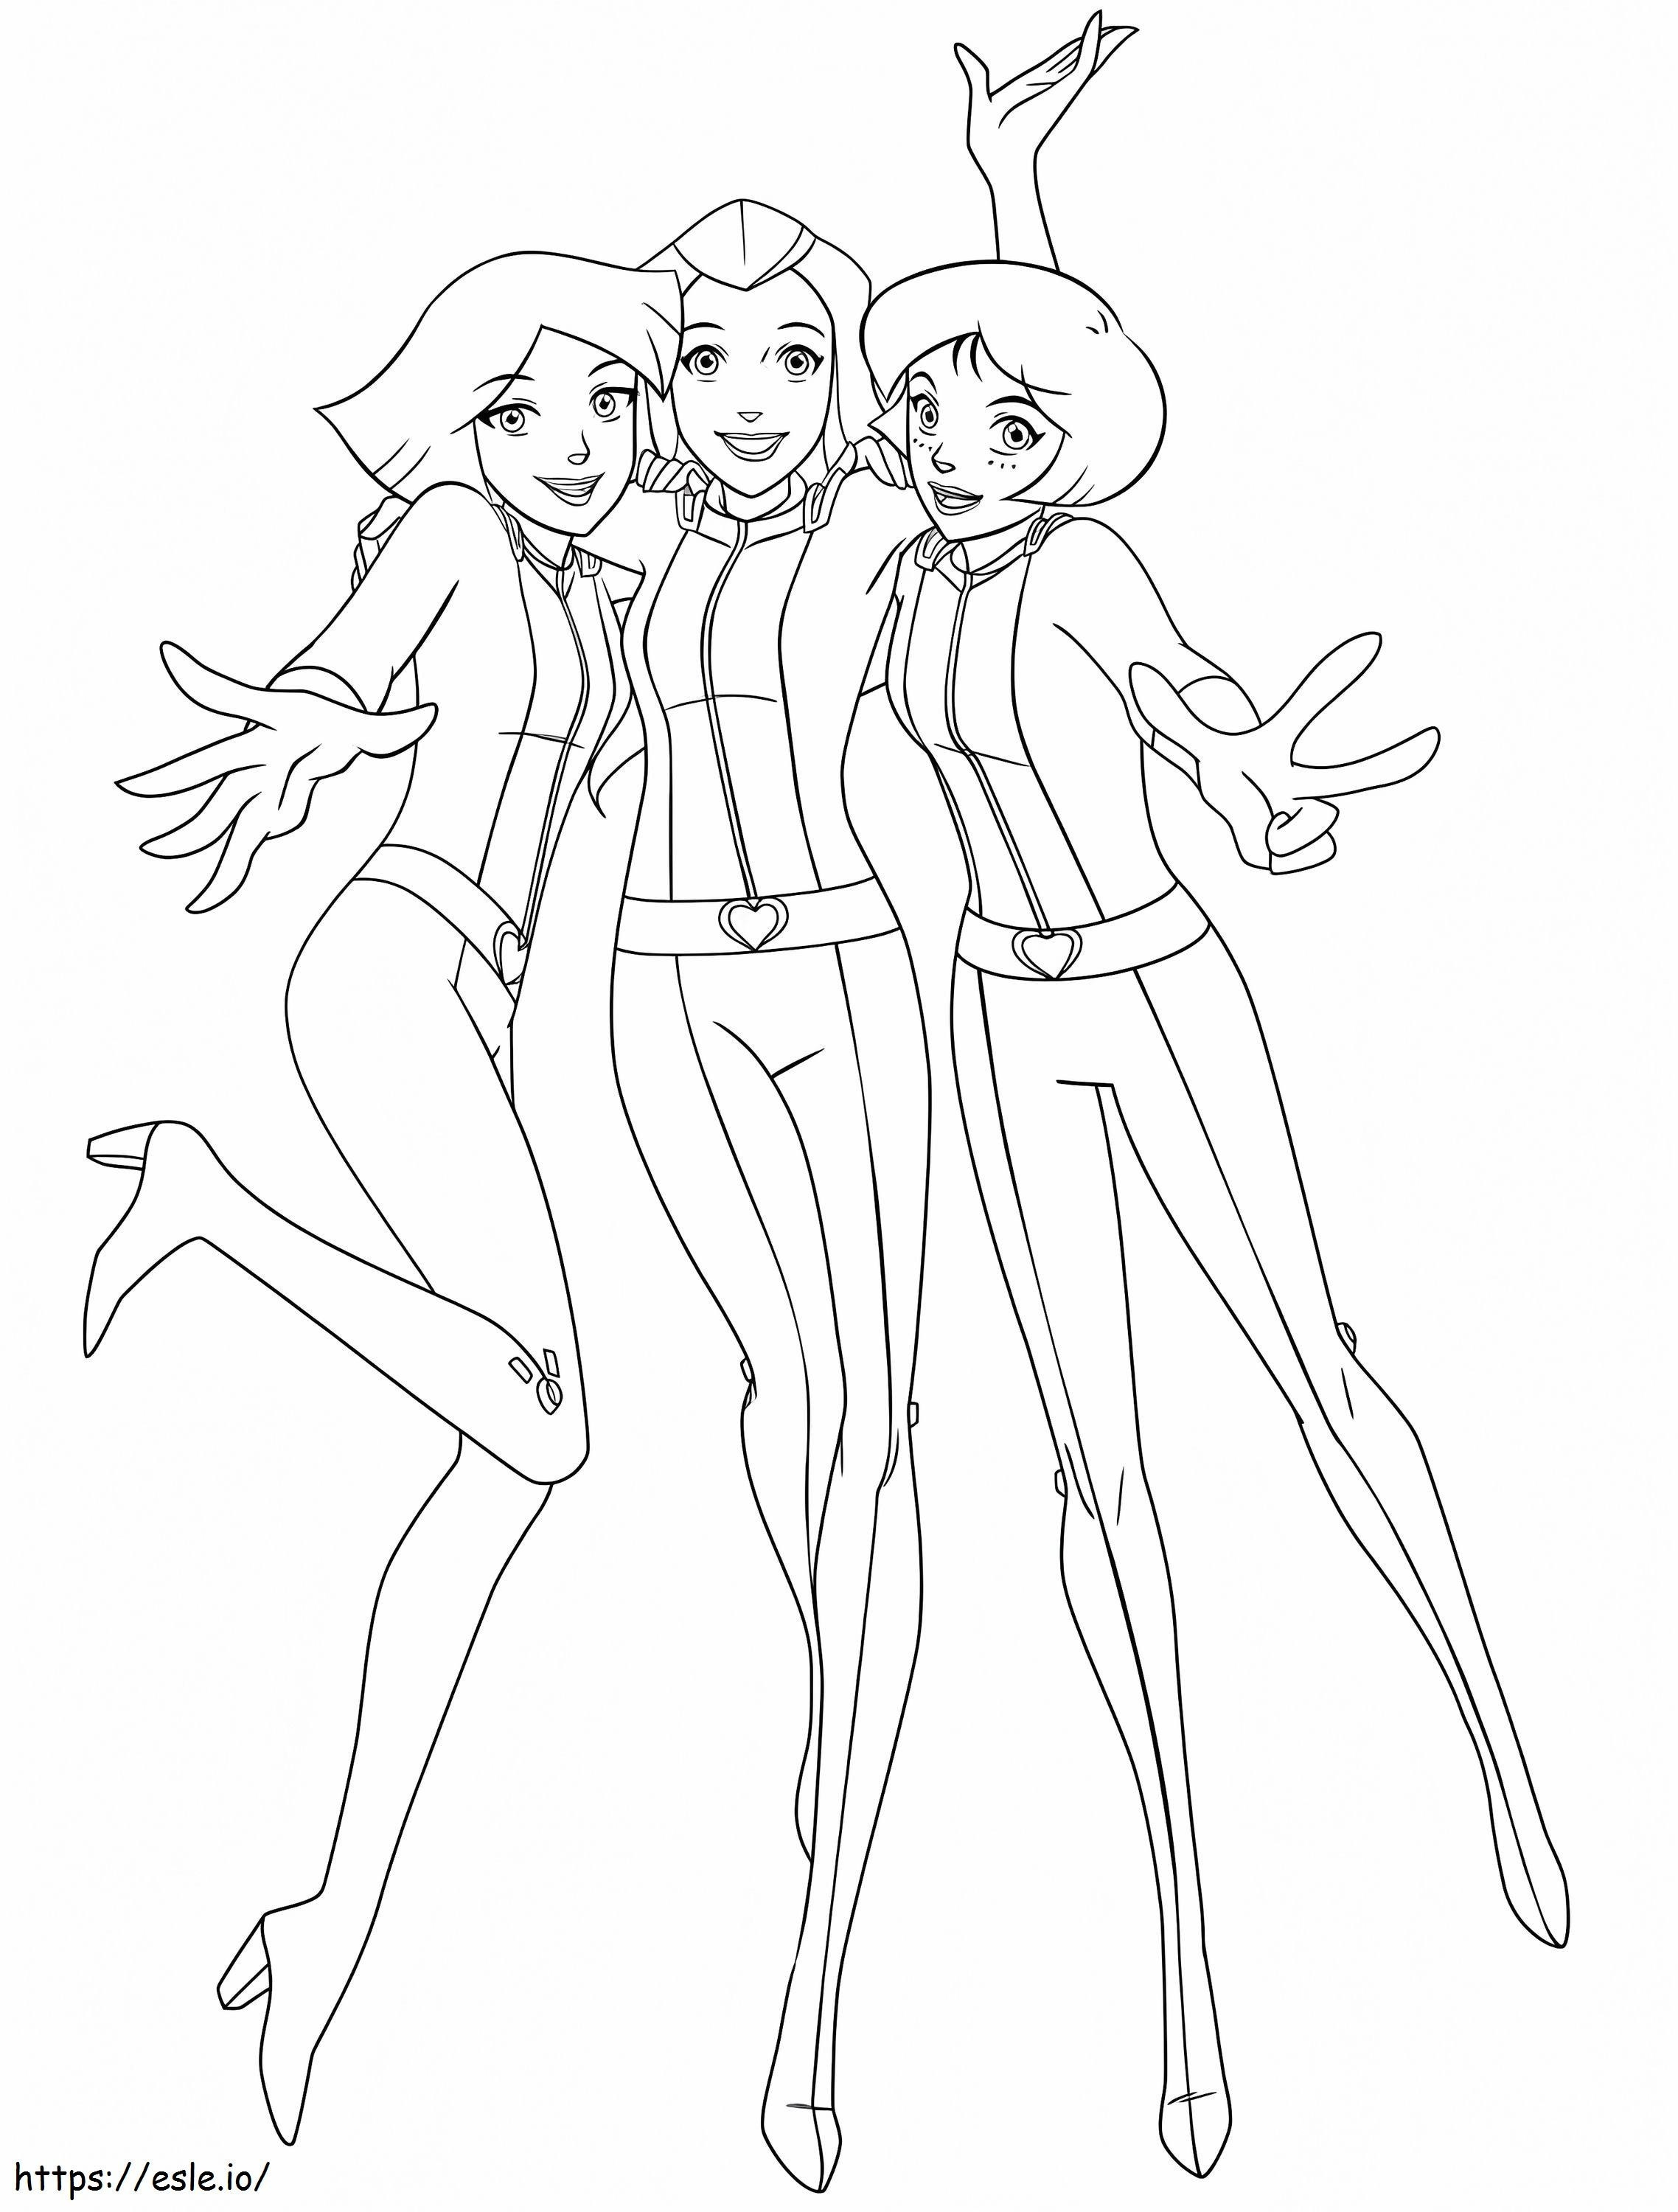 Totally Spies 4 coloring page